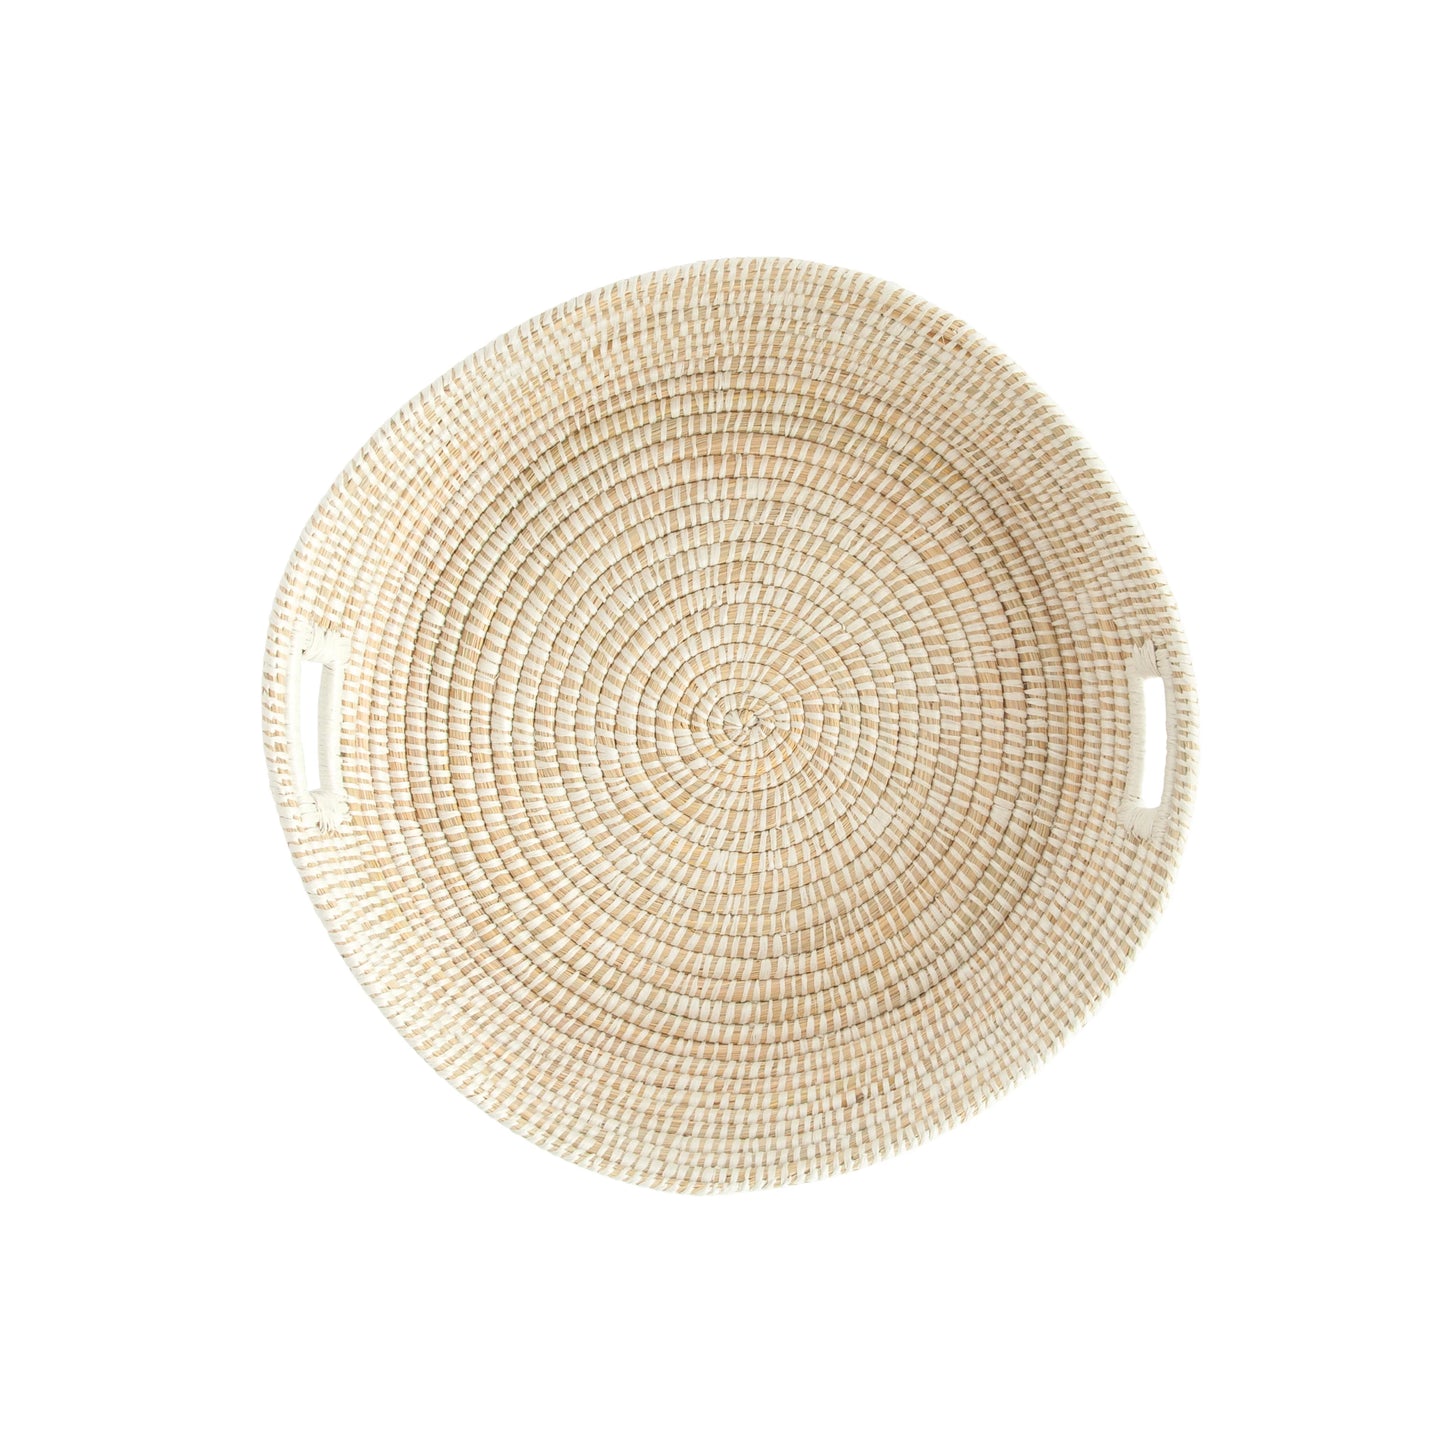 Hand Woven Grass Basket with Handles